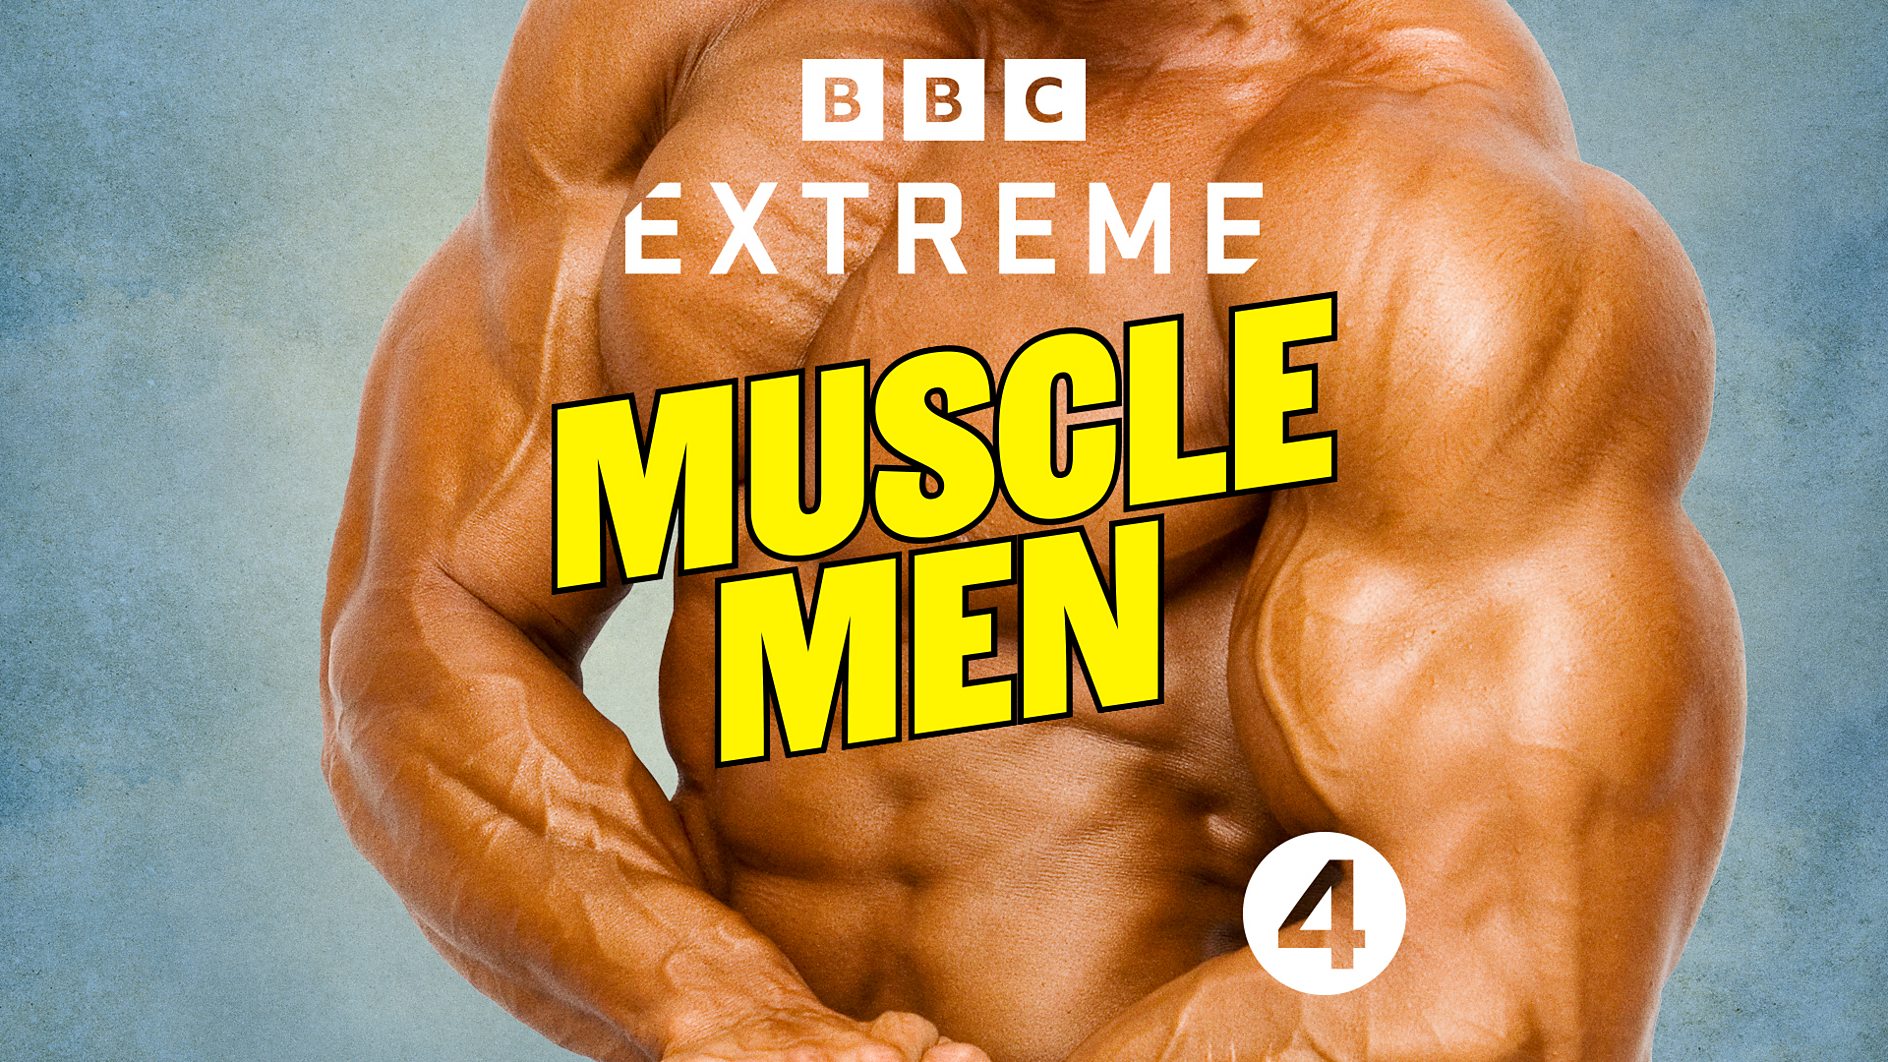 New BBC Radio 4 podcast strand Extreme launches with Muscle Men